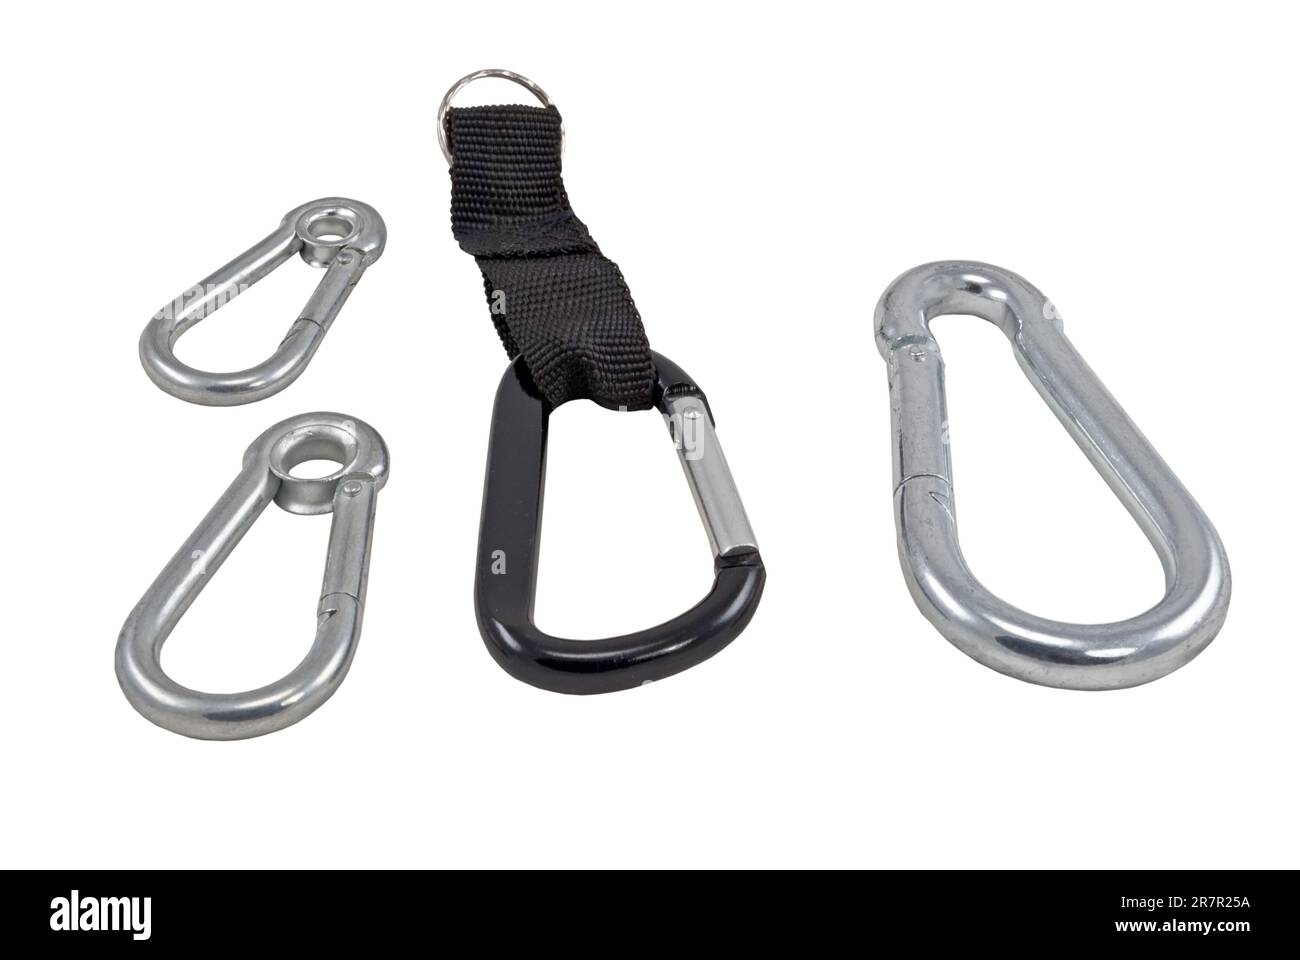 Climber carabiners on a white background. Stock Photo